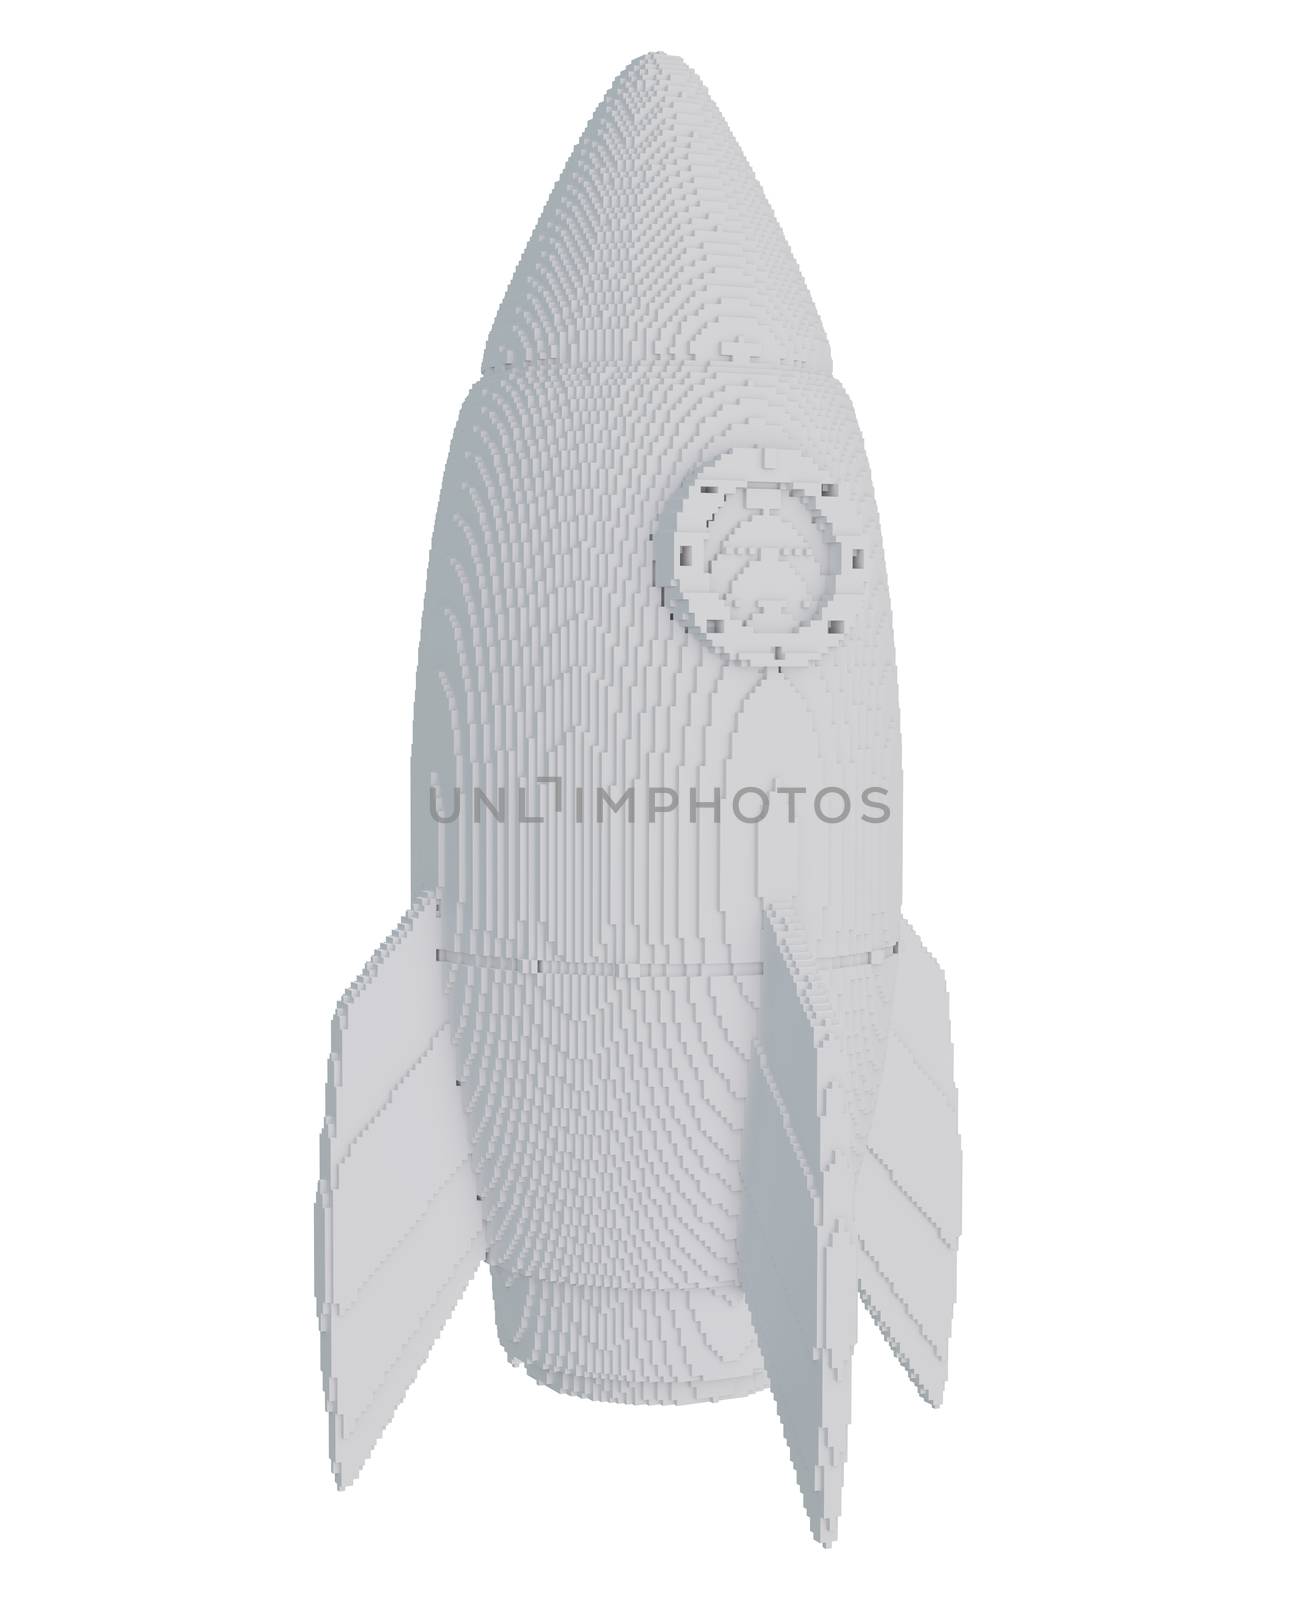 3d printed rocket isolated on white background. 3D illustration